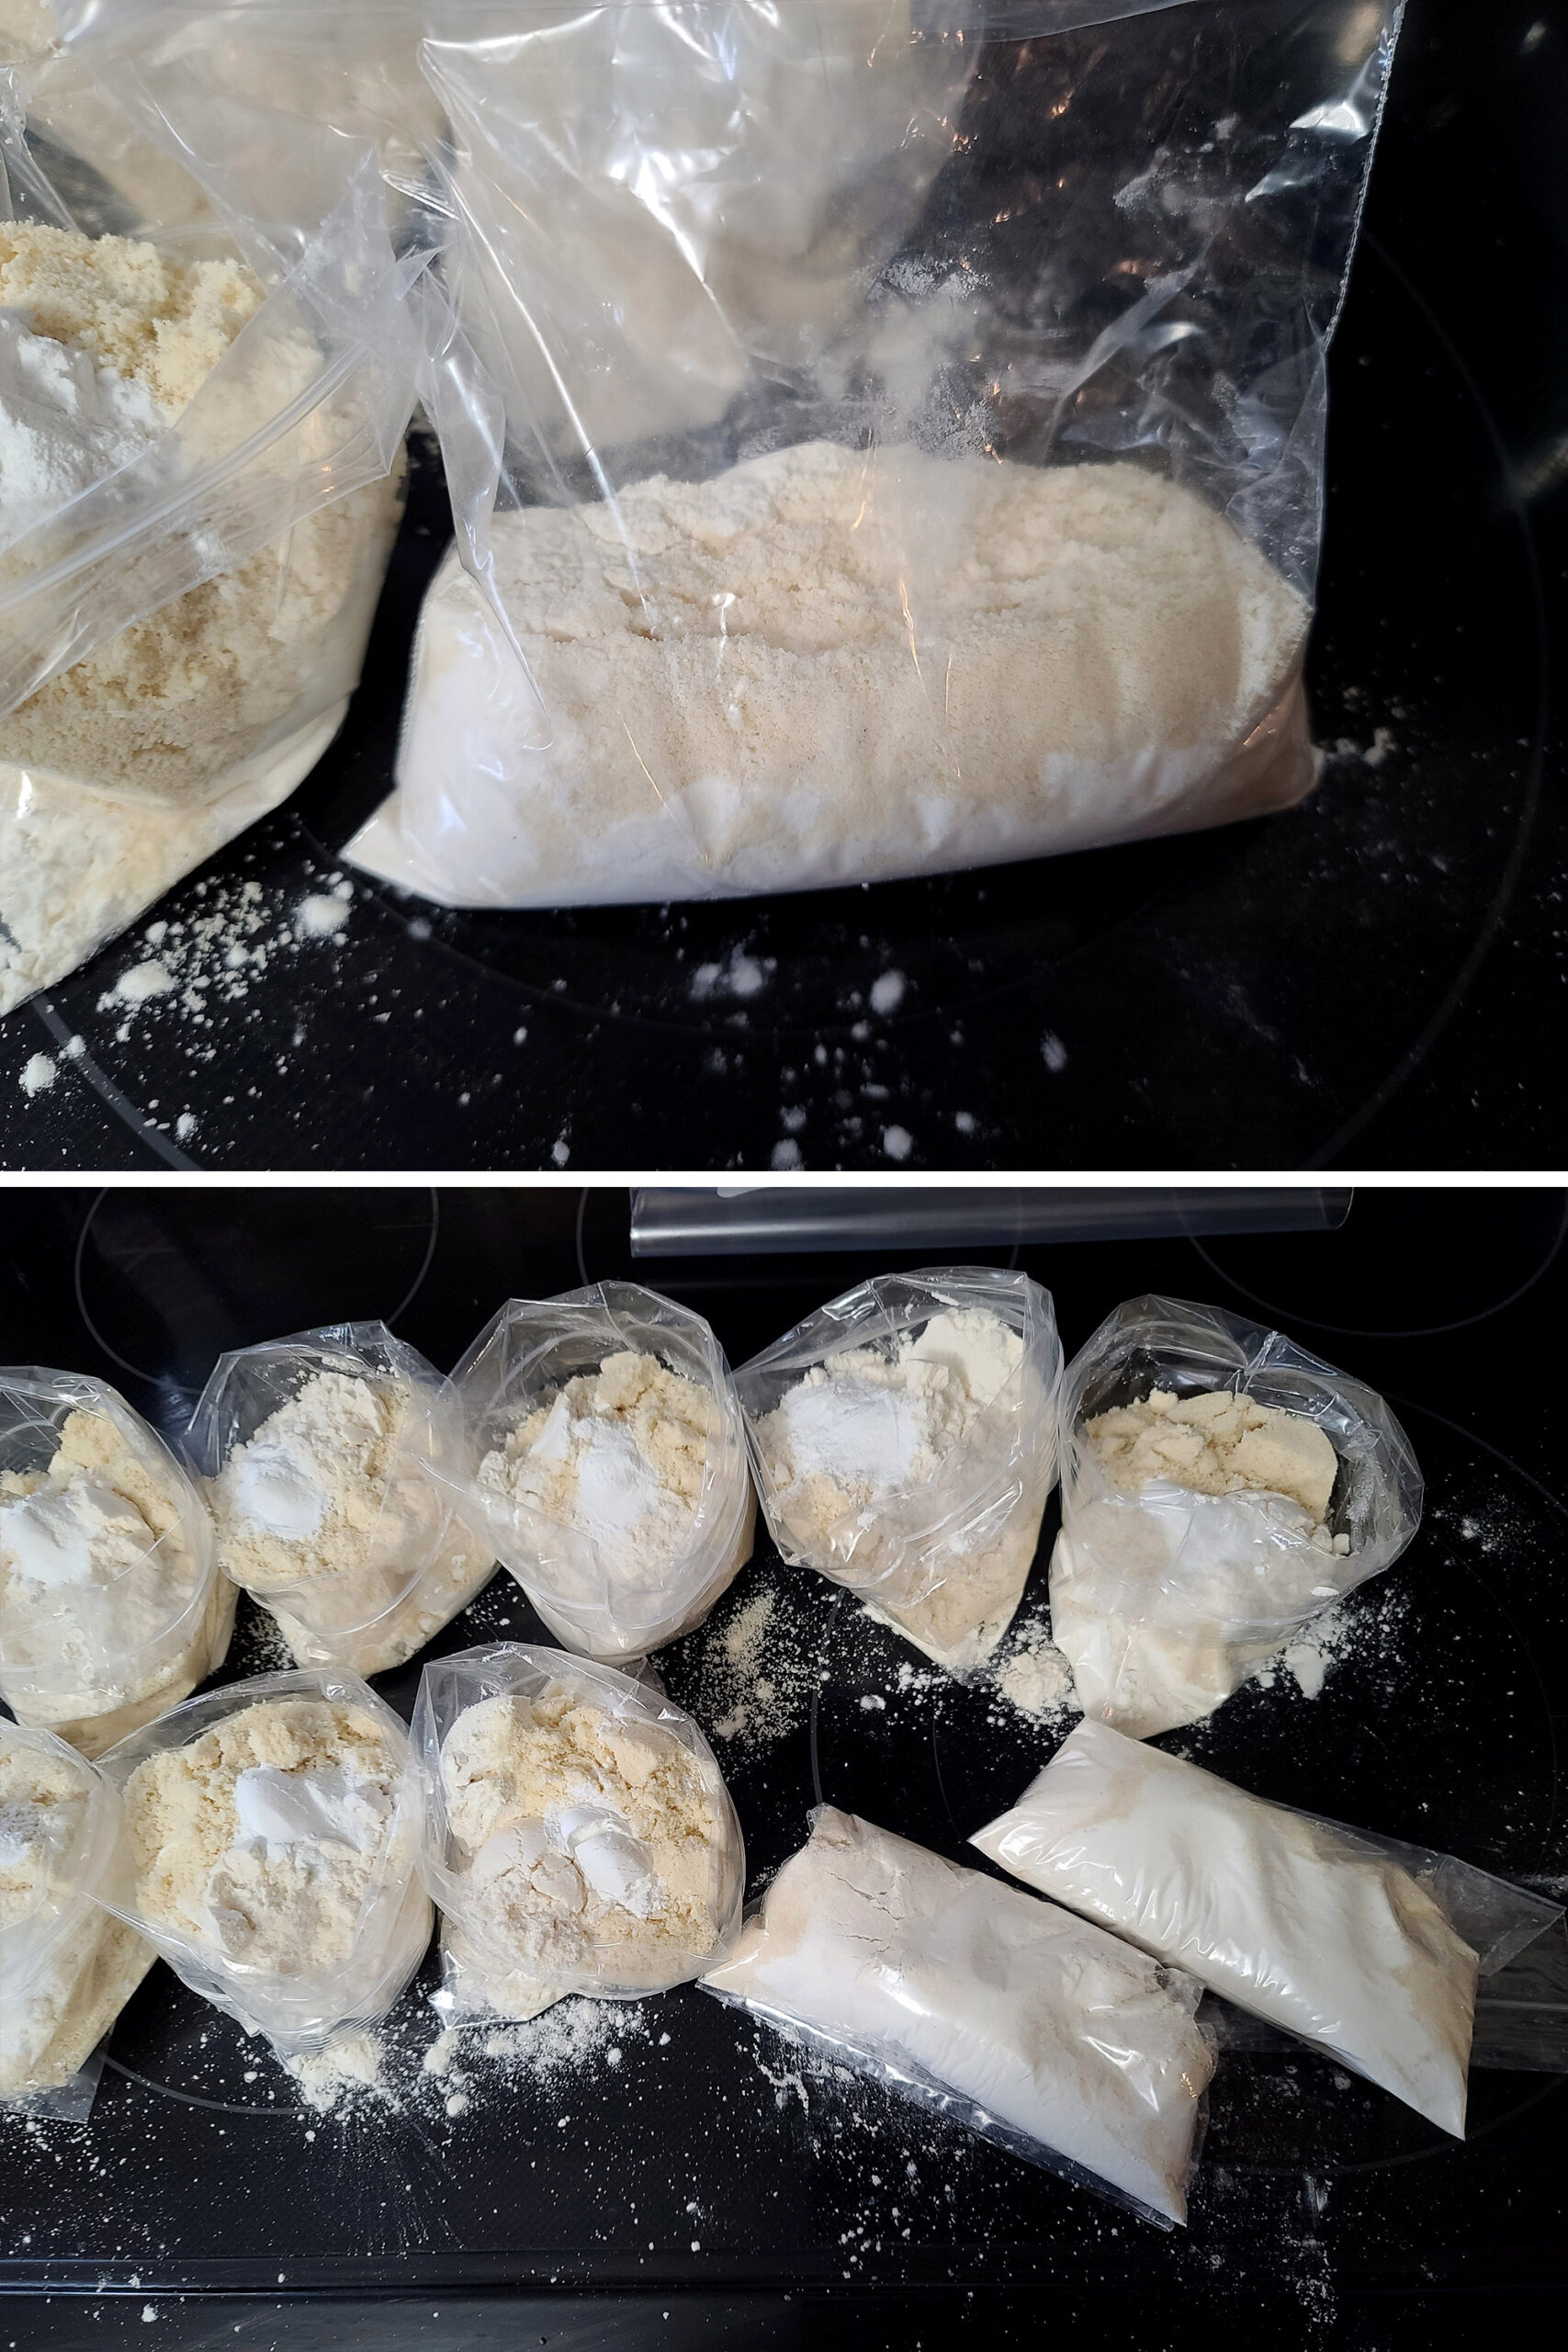 2 part image showing a bag of pancake mix being mixed, and a couple sealed bags of camping pancake mix sealed and ready to go.